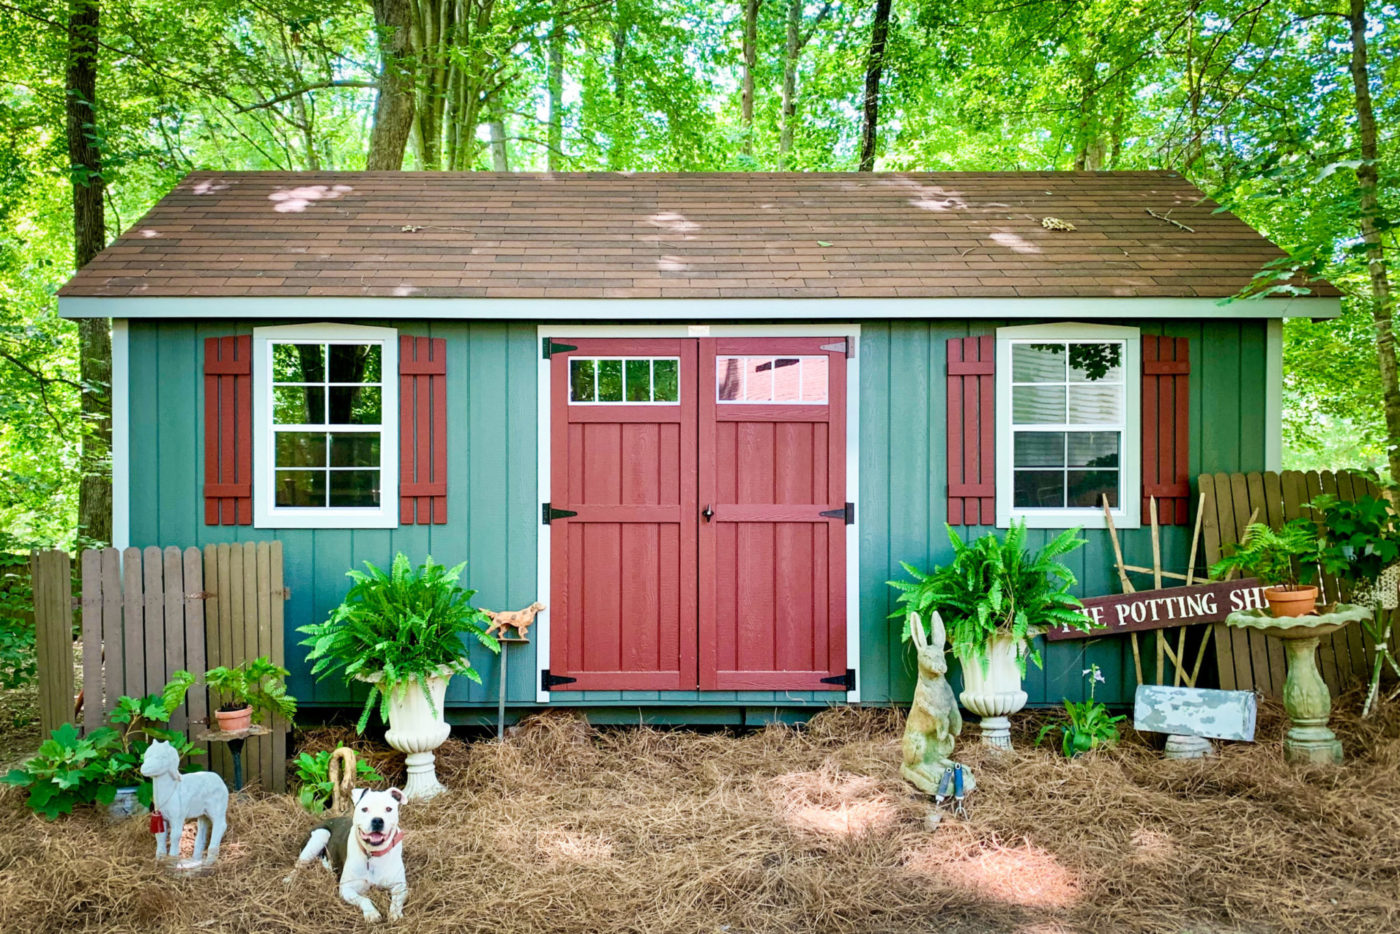 Wood Sheds In Ky And Surrounding Areas